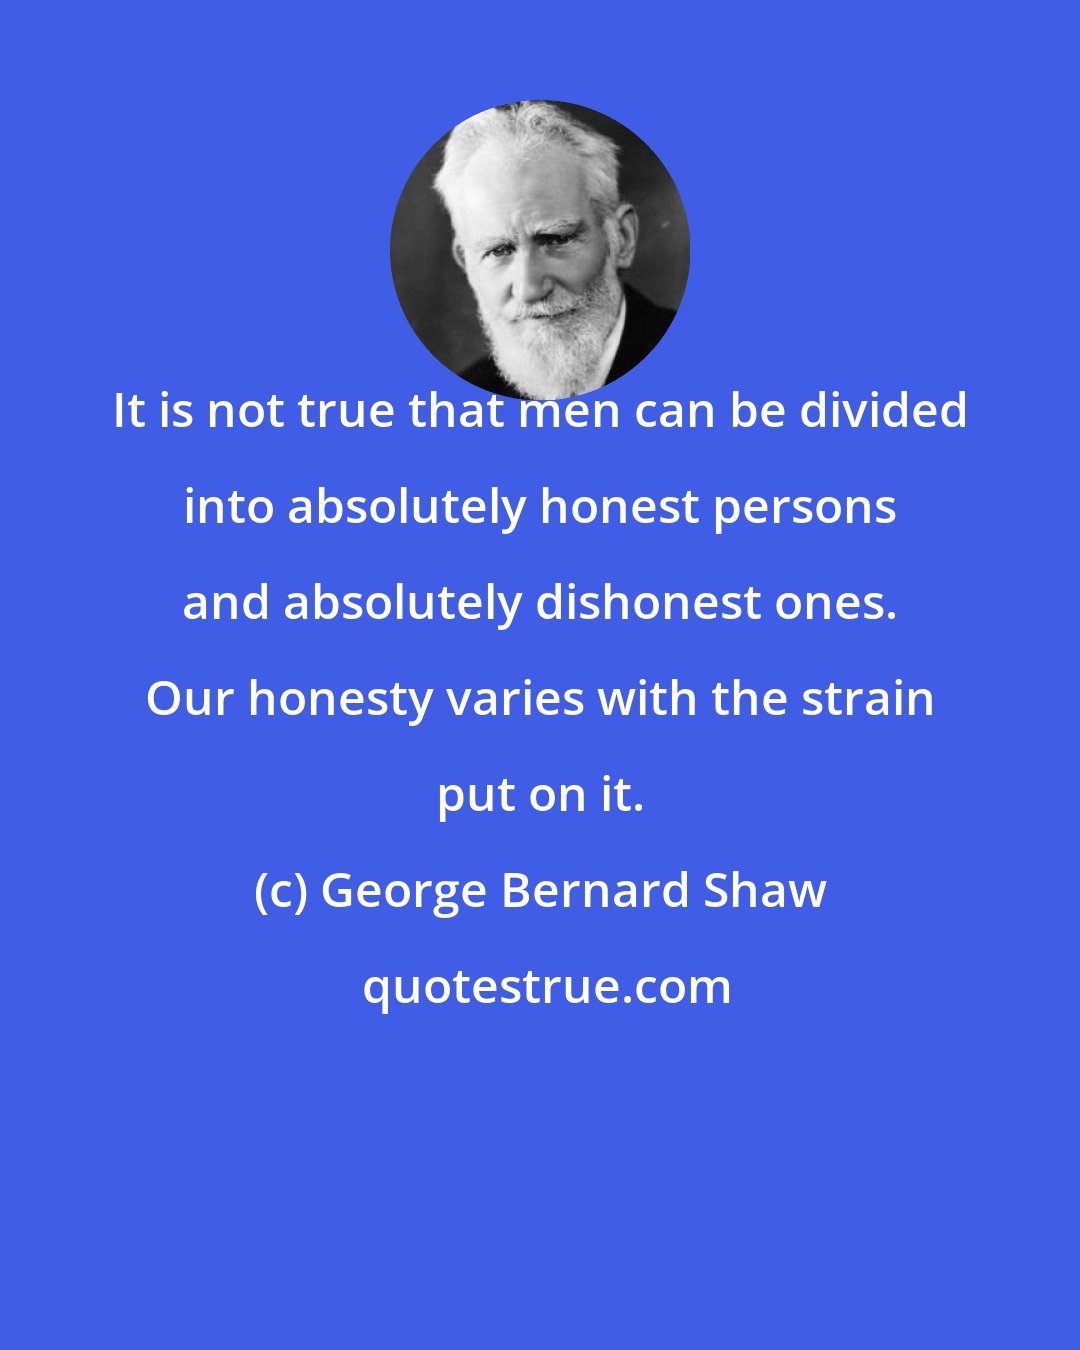 George Bernard Shaw: It is not true that men can be divided into absolutely honest persons and absolutely dishonest ones. Our honesty varies with the strain put on it.